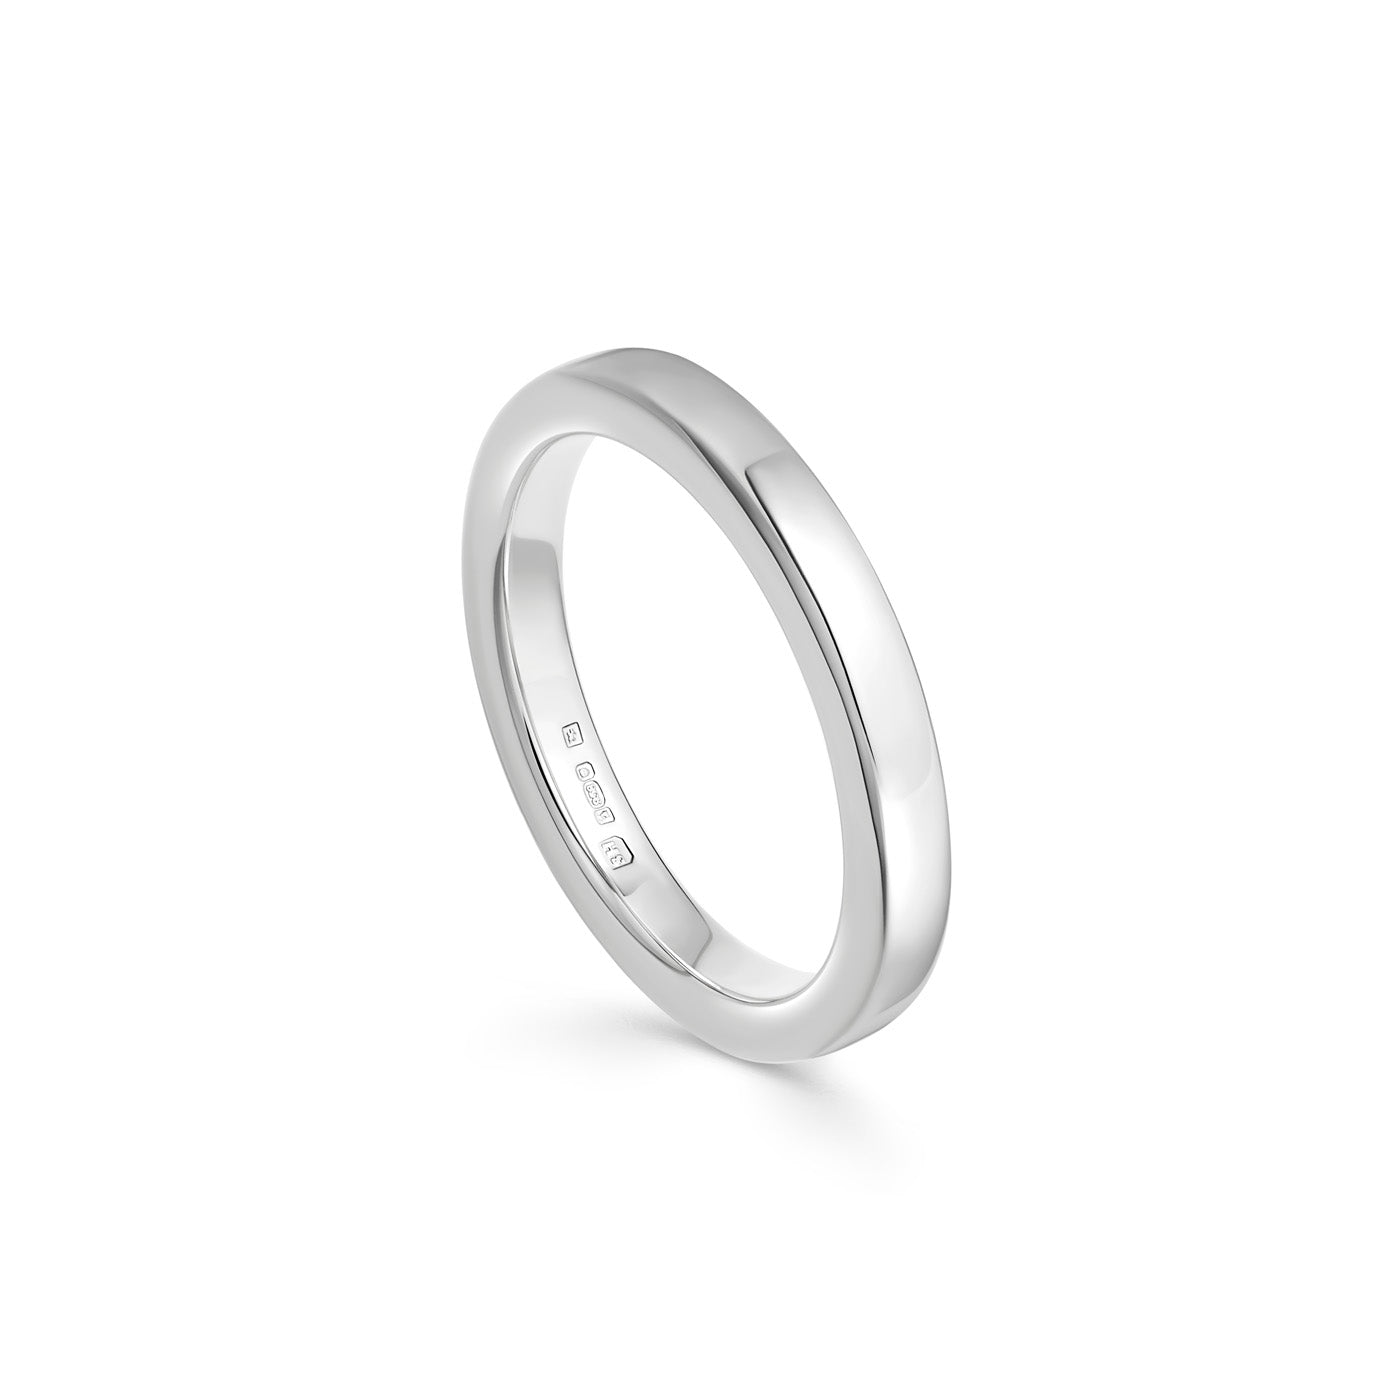 Deluxe Sterling Silver Court Ring - 3mm